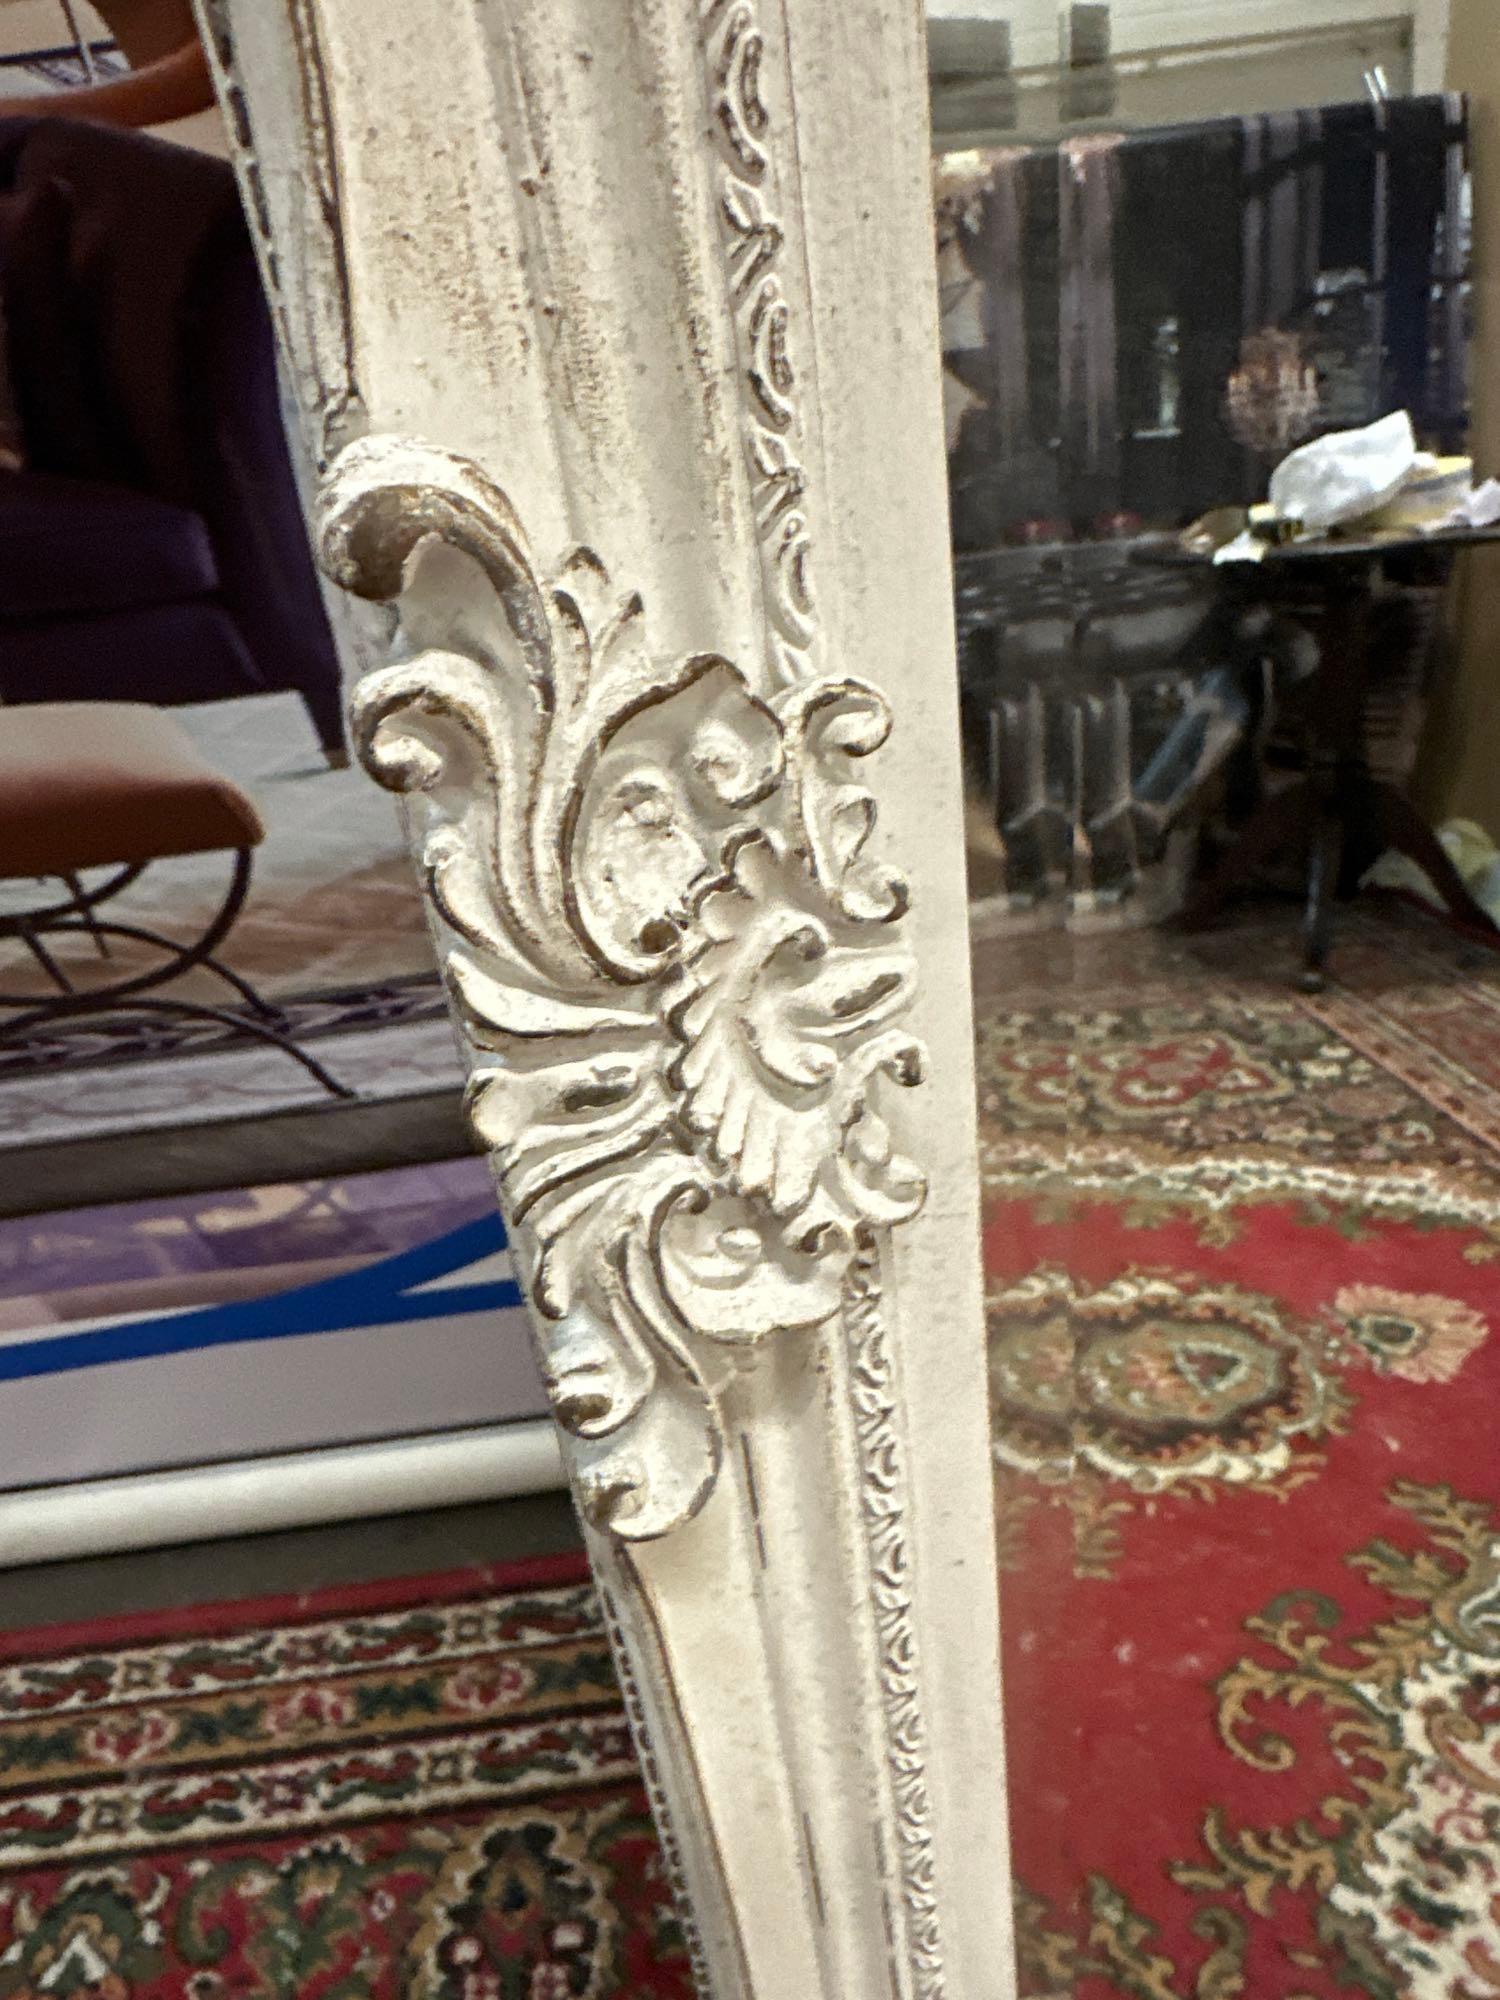 Fiennes Rectangular Mirror In Antique White A Beautiful Mirror Is Always A Welcome Addition To Any - Image 3 of 3